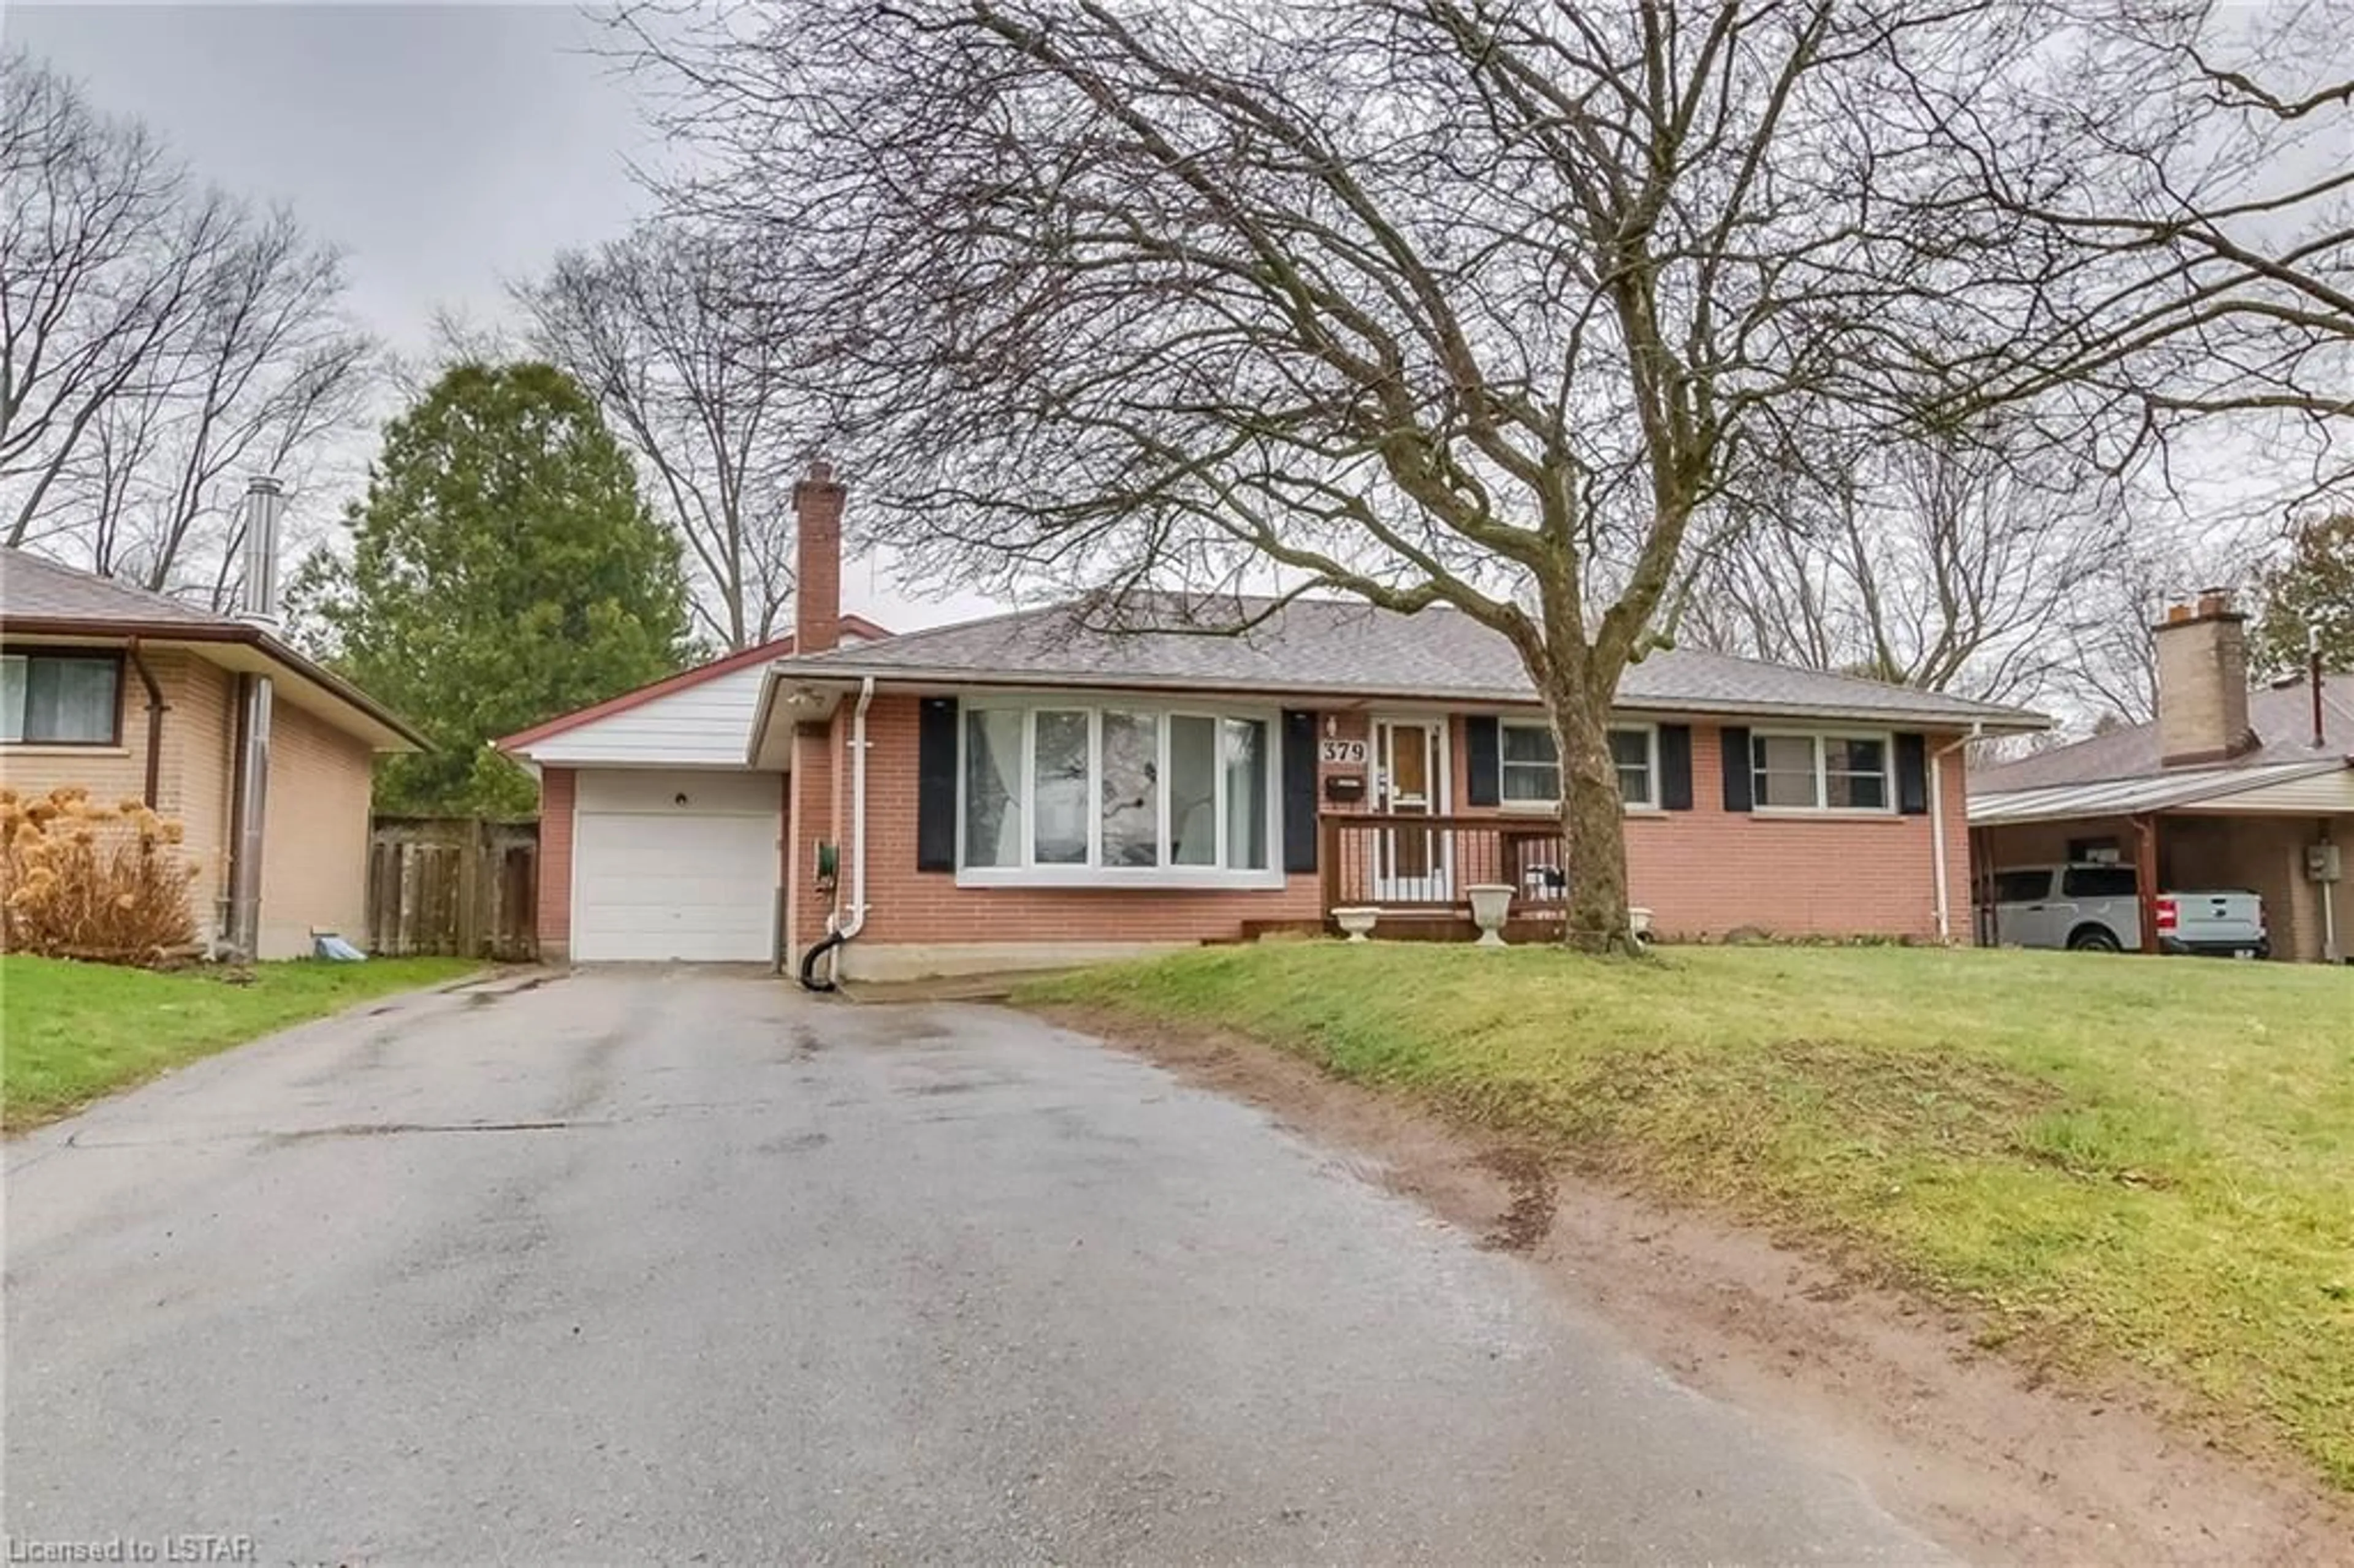 Home with brick exterior material for 379 Griffith St, London Ontario N6K 2S1